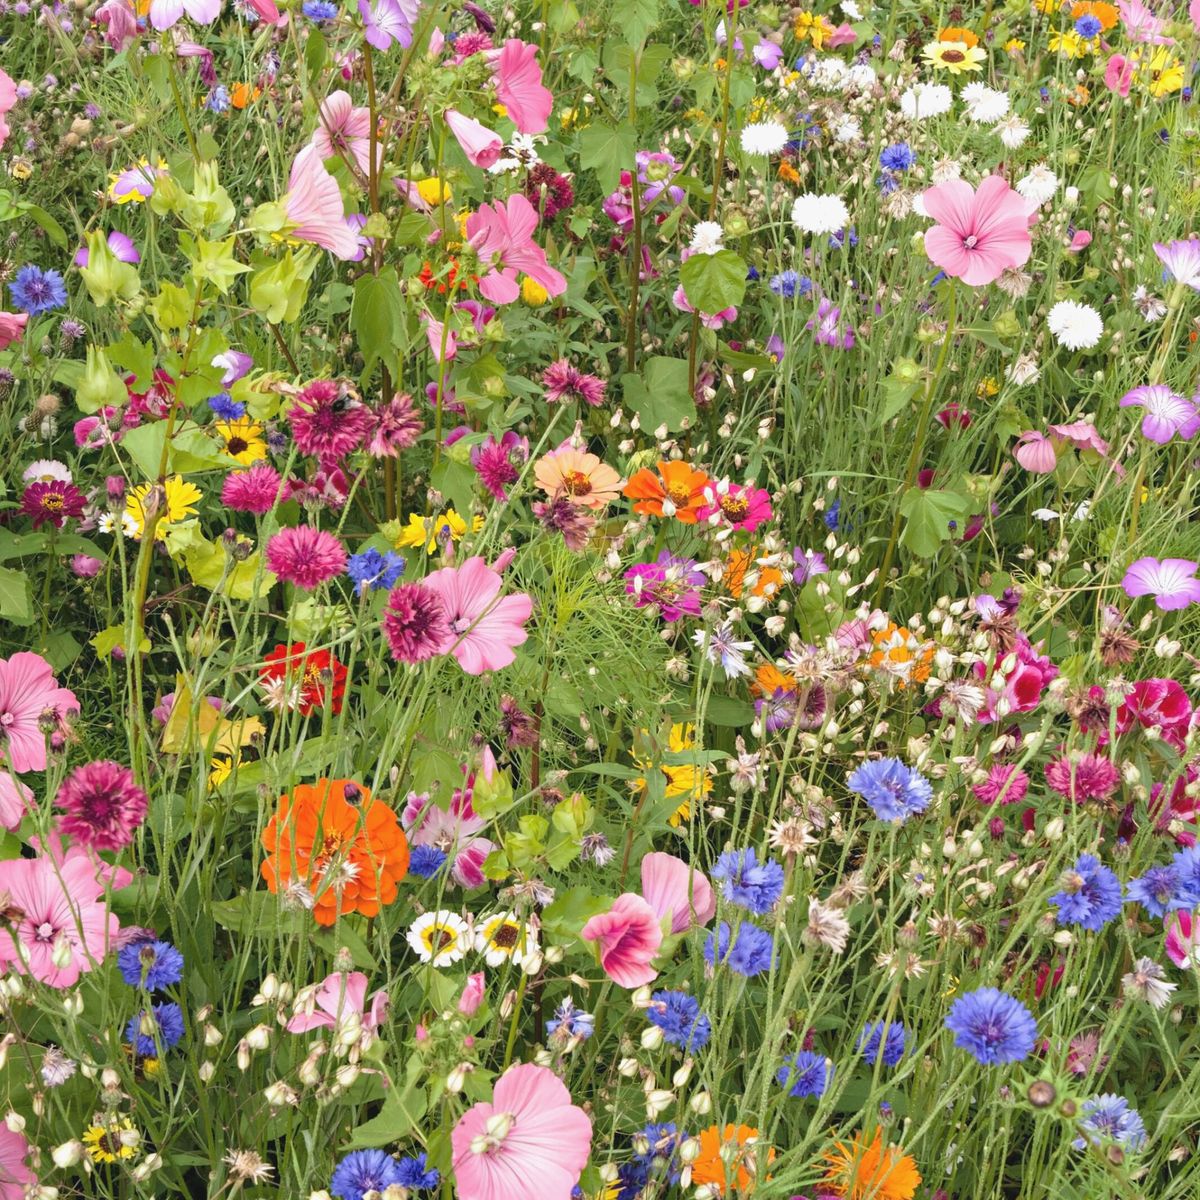 How to embrace the 'rewilding' trend in your own garden